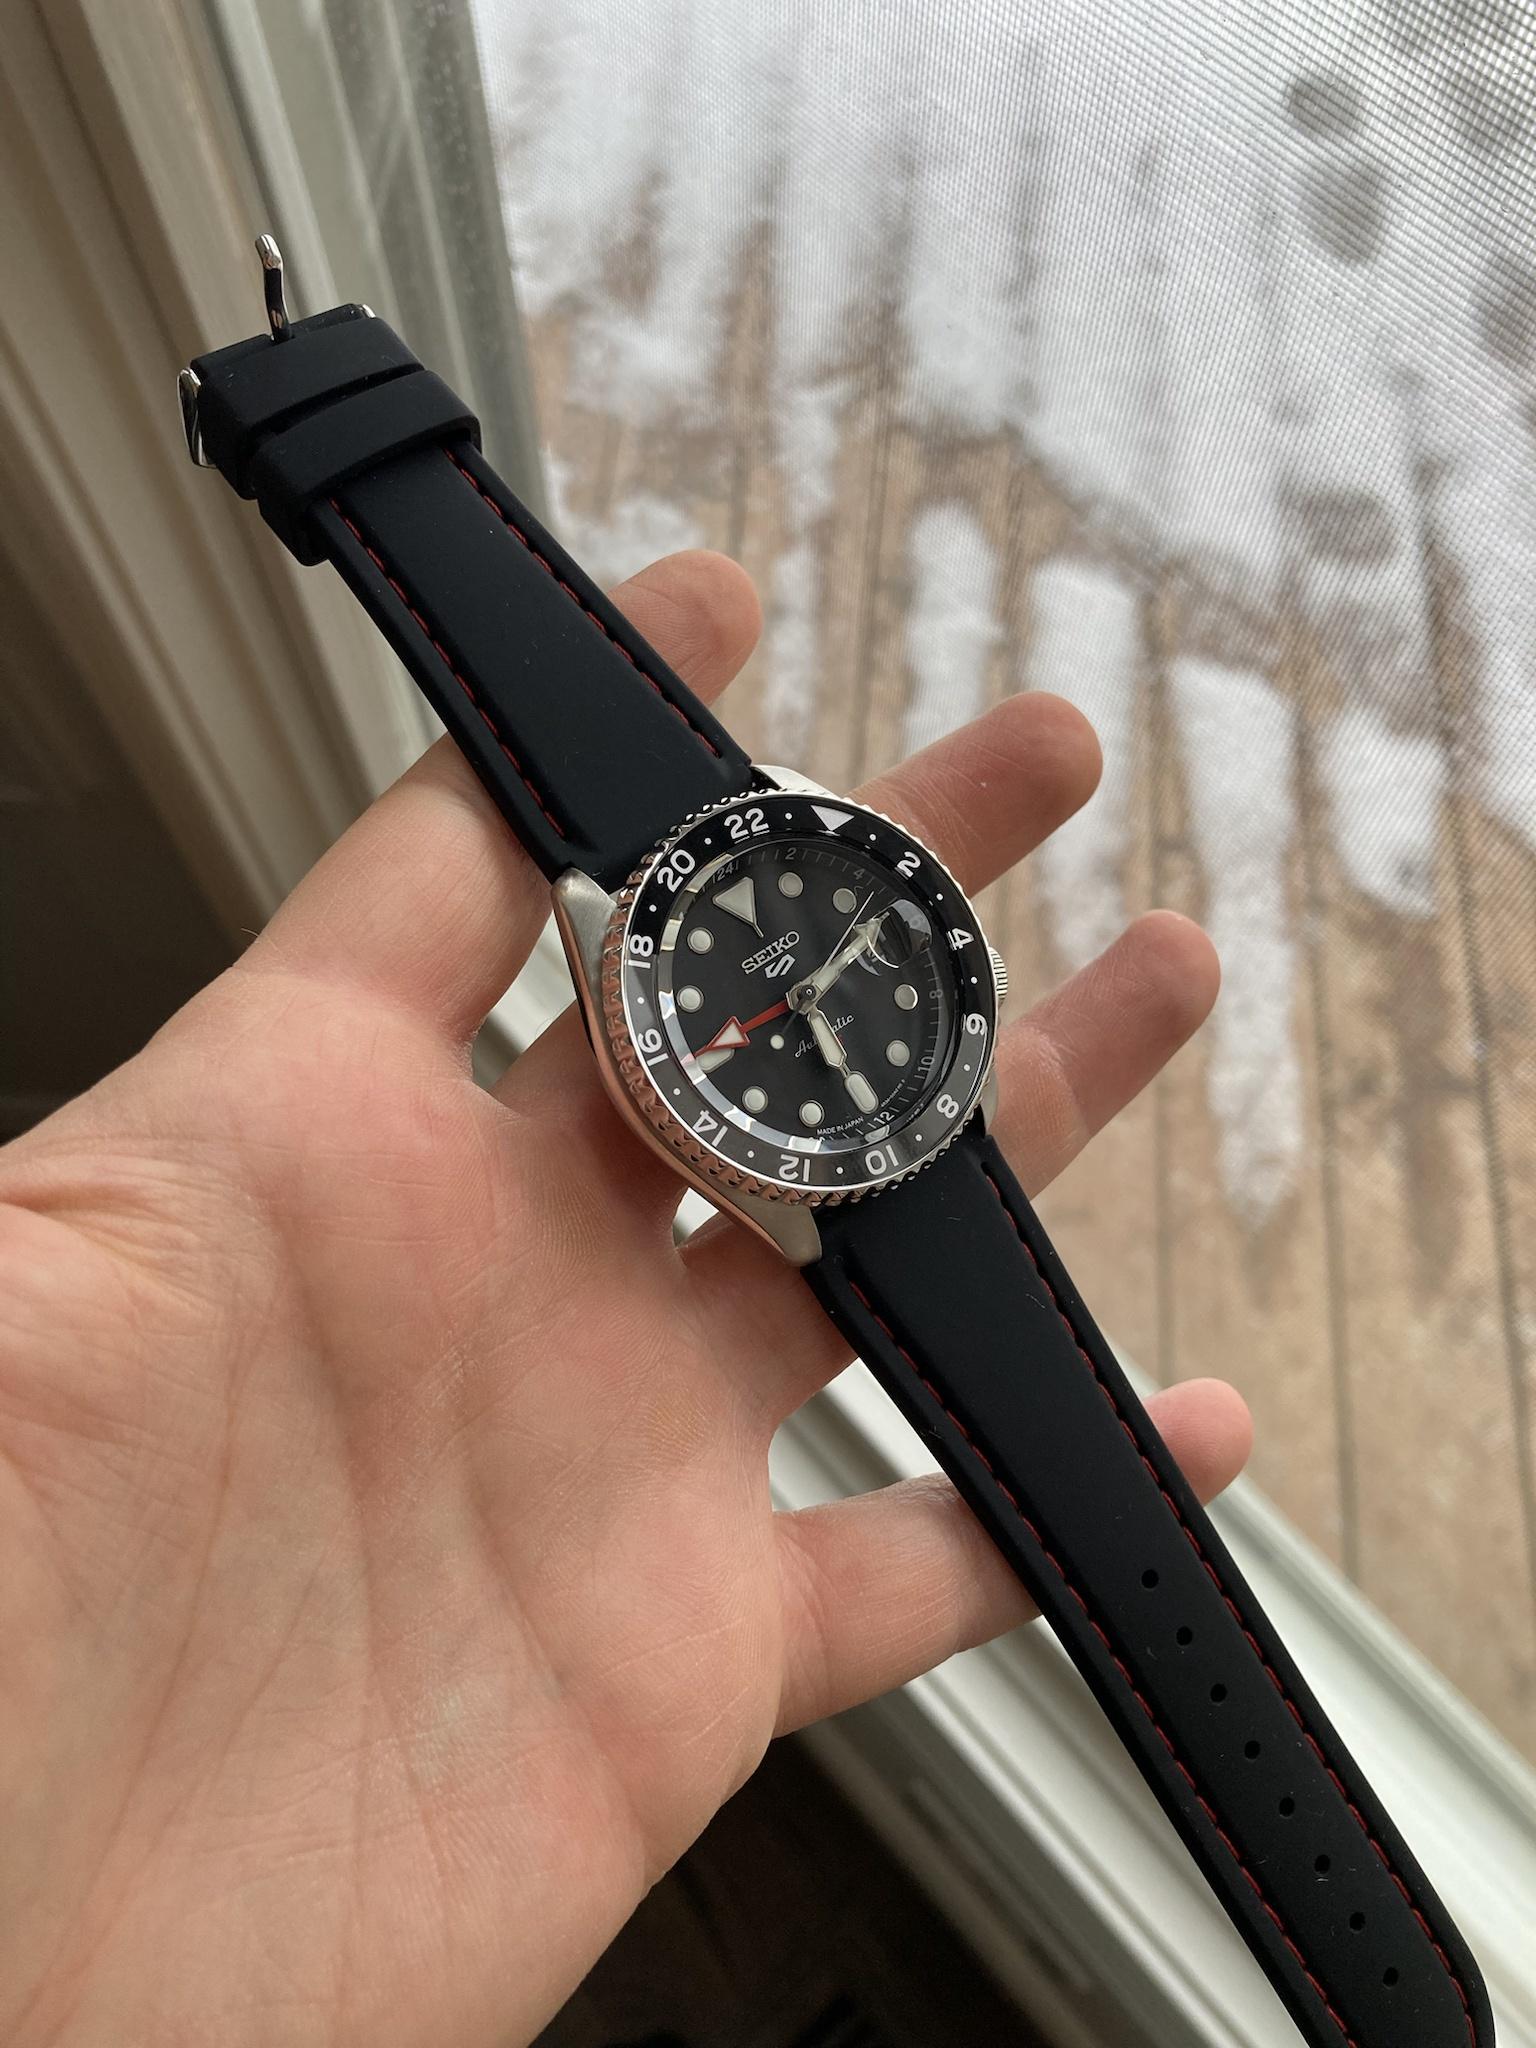 WTS] 22 mm Silicone Strap - Black, Red Stitching - Originally purchased for Seiko  SSK001 | WatchCharts